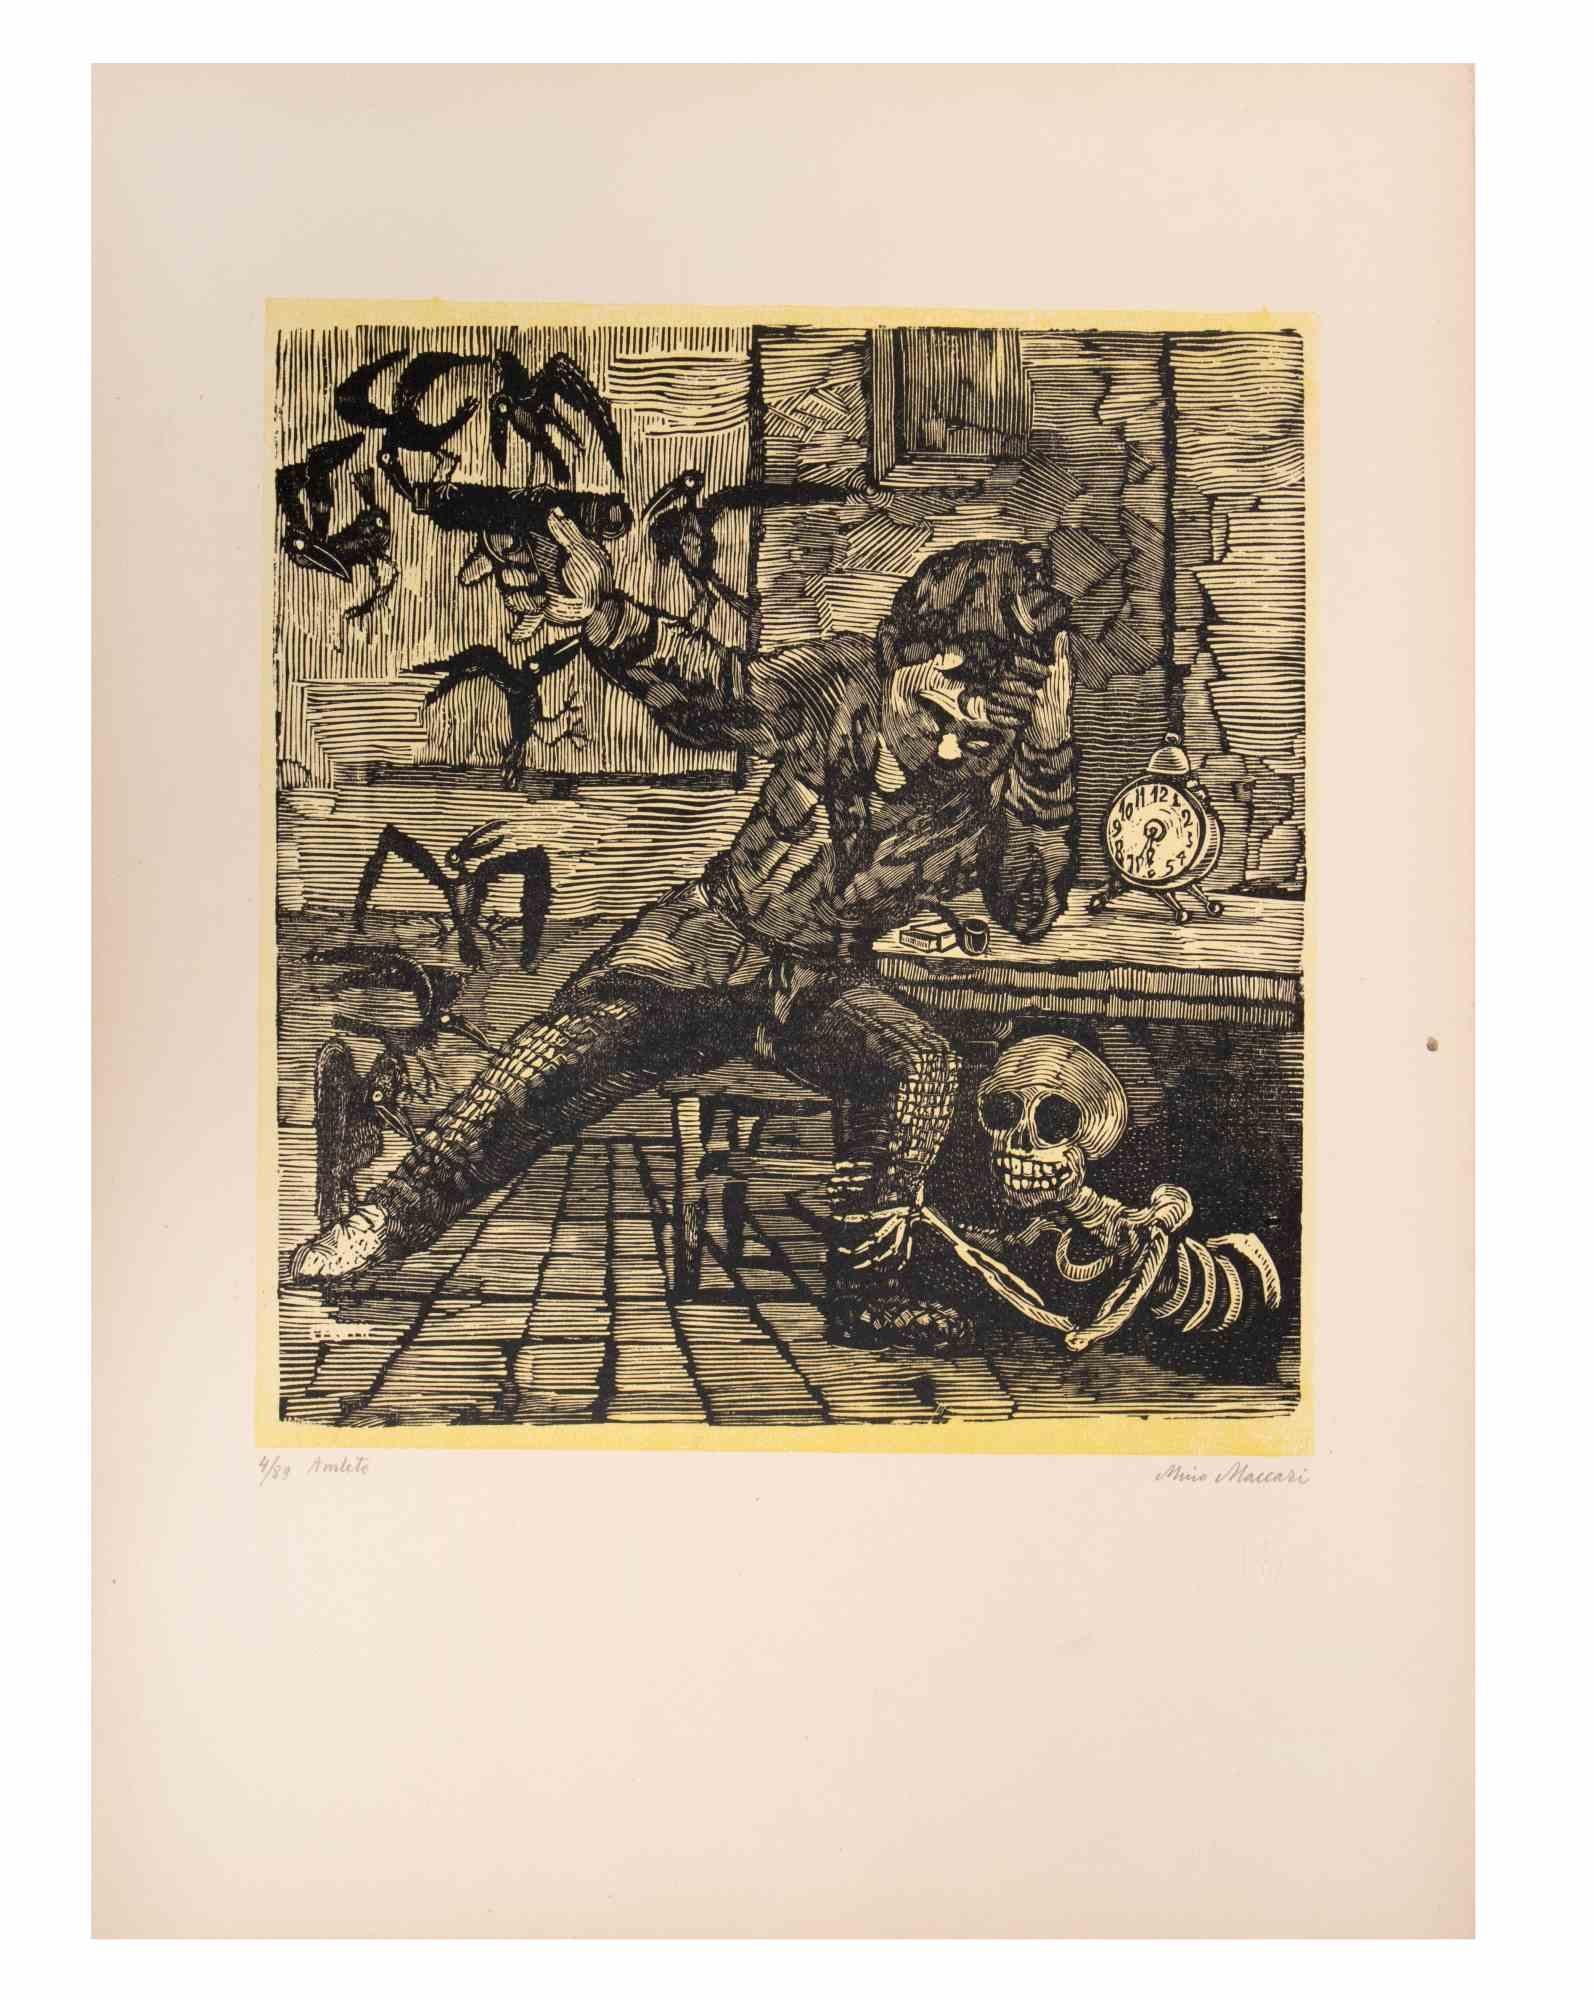 Hamlet (Amleto) is an Artwork realized by Mino Maccari  (1924-1989) in the Mid-20th Century.

B./W.  woodcut on paper. Hand-signed on the lower, numbered 4/89 specimens and titled on the left margin.

Good conditions.

Mino Maccari (Siena,